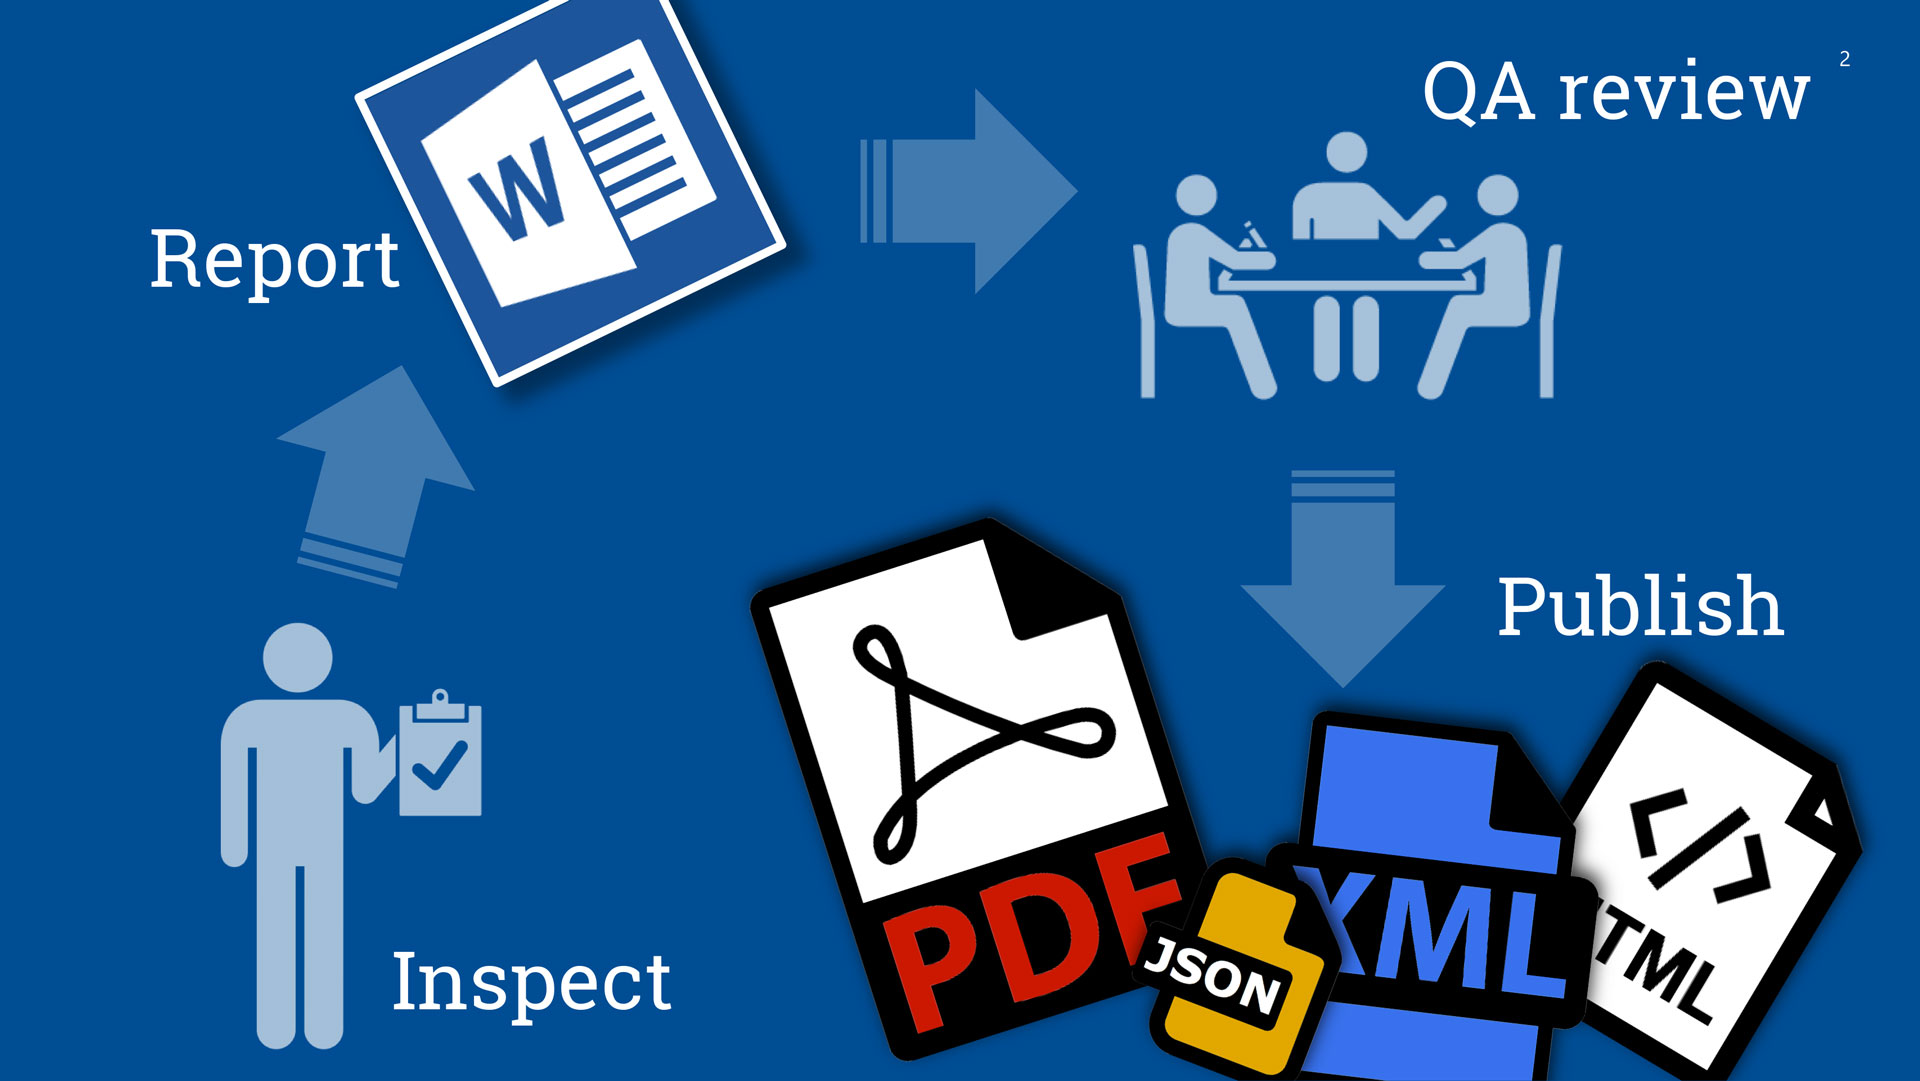 Workflow of publishing process - Inspect, report, QA review, publish